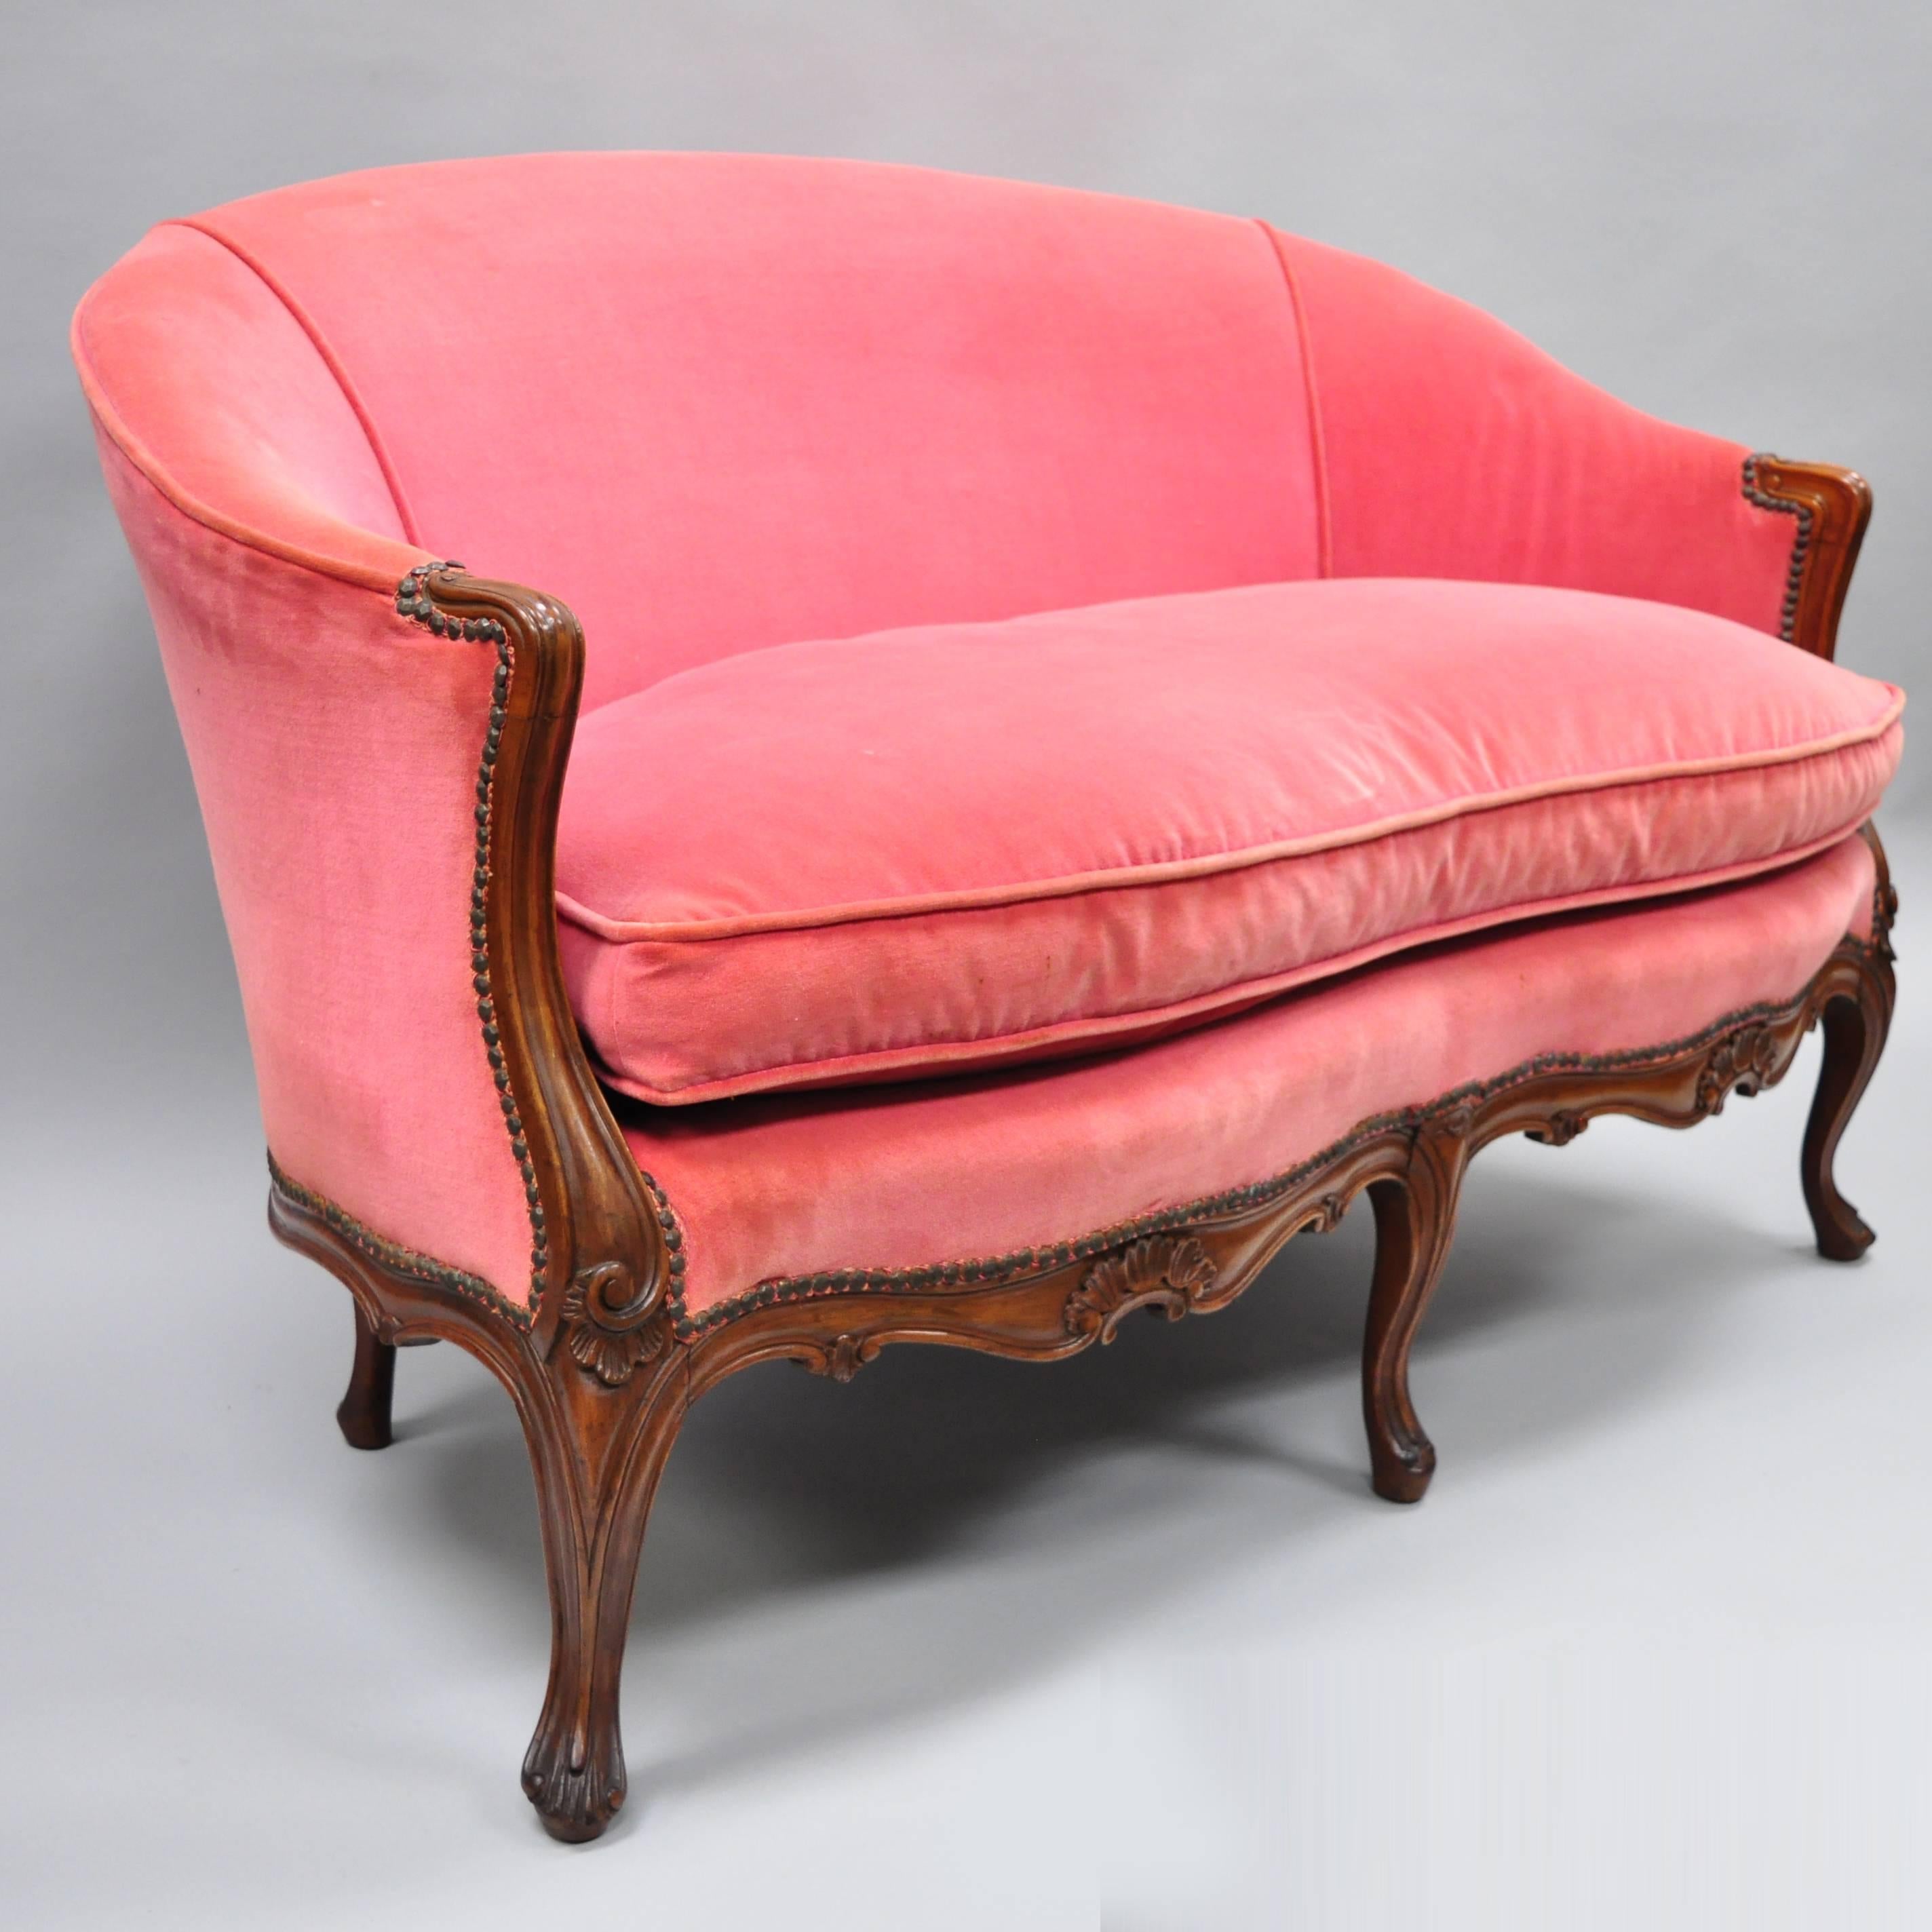 Antique French Louis XV Style Carved Walnut Settee Loveseat Canapé Pink Sofa 5